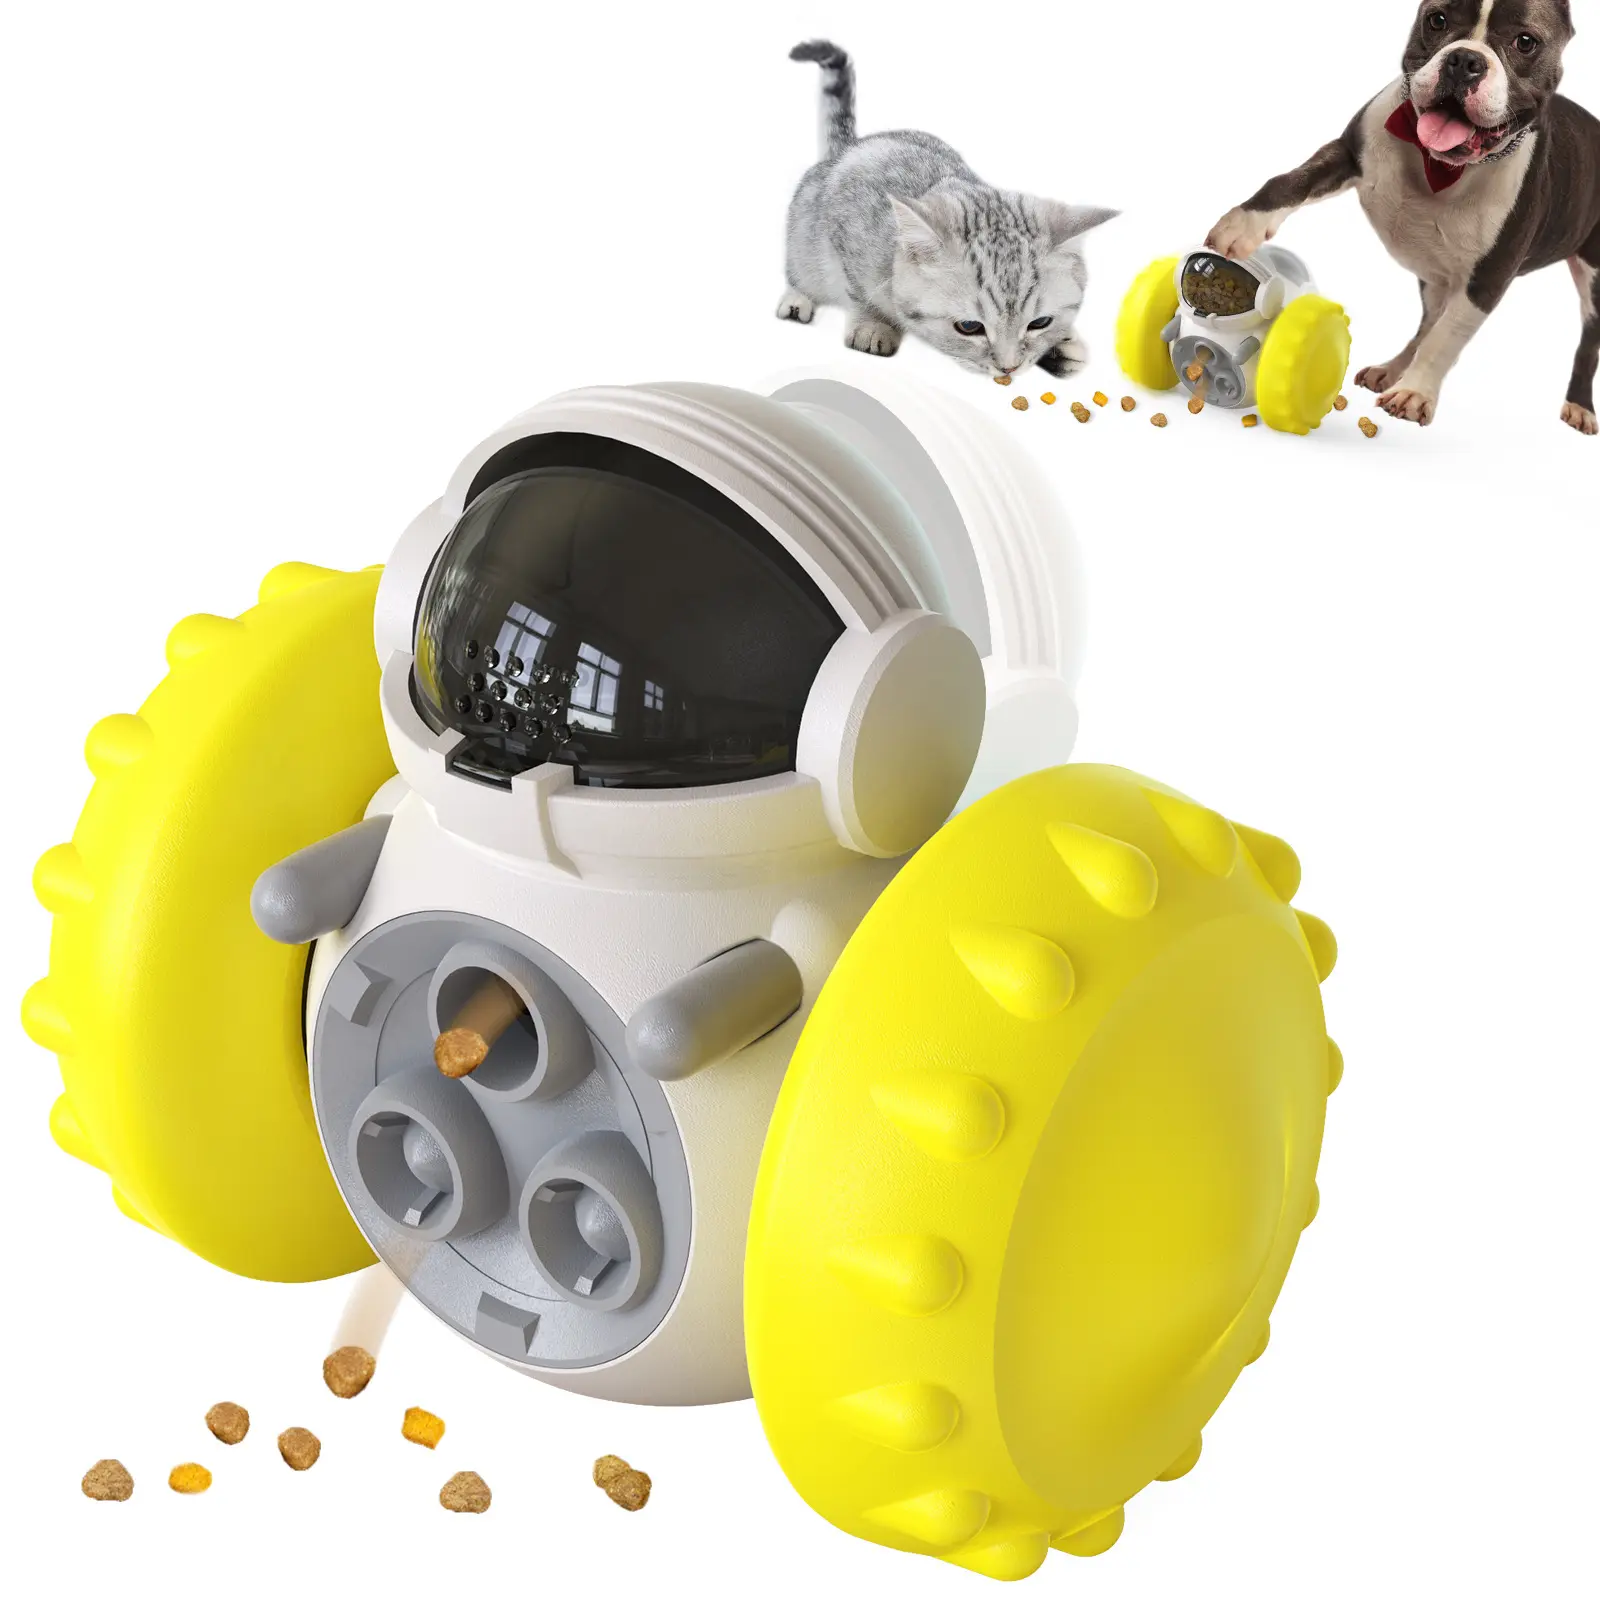 Hot Pet Supplies Dog interactive dog toys pet accessories pet educational toy